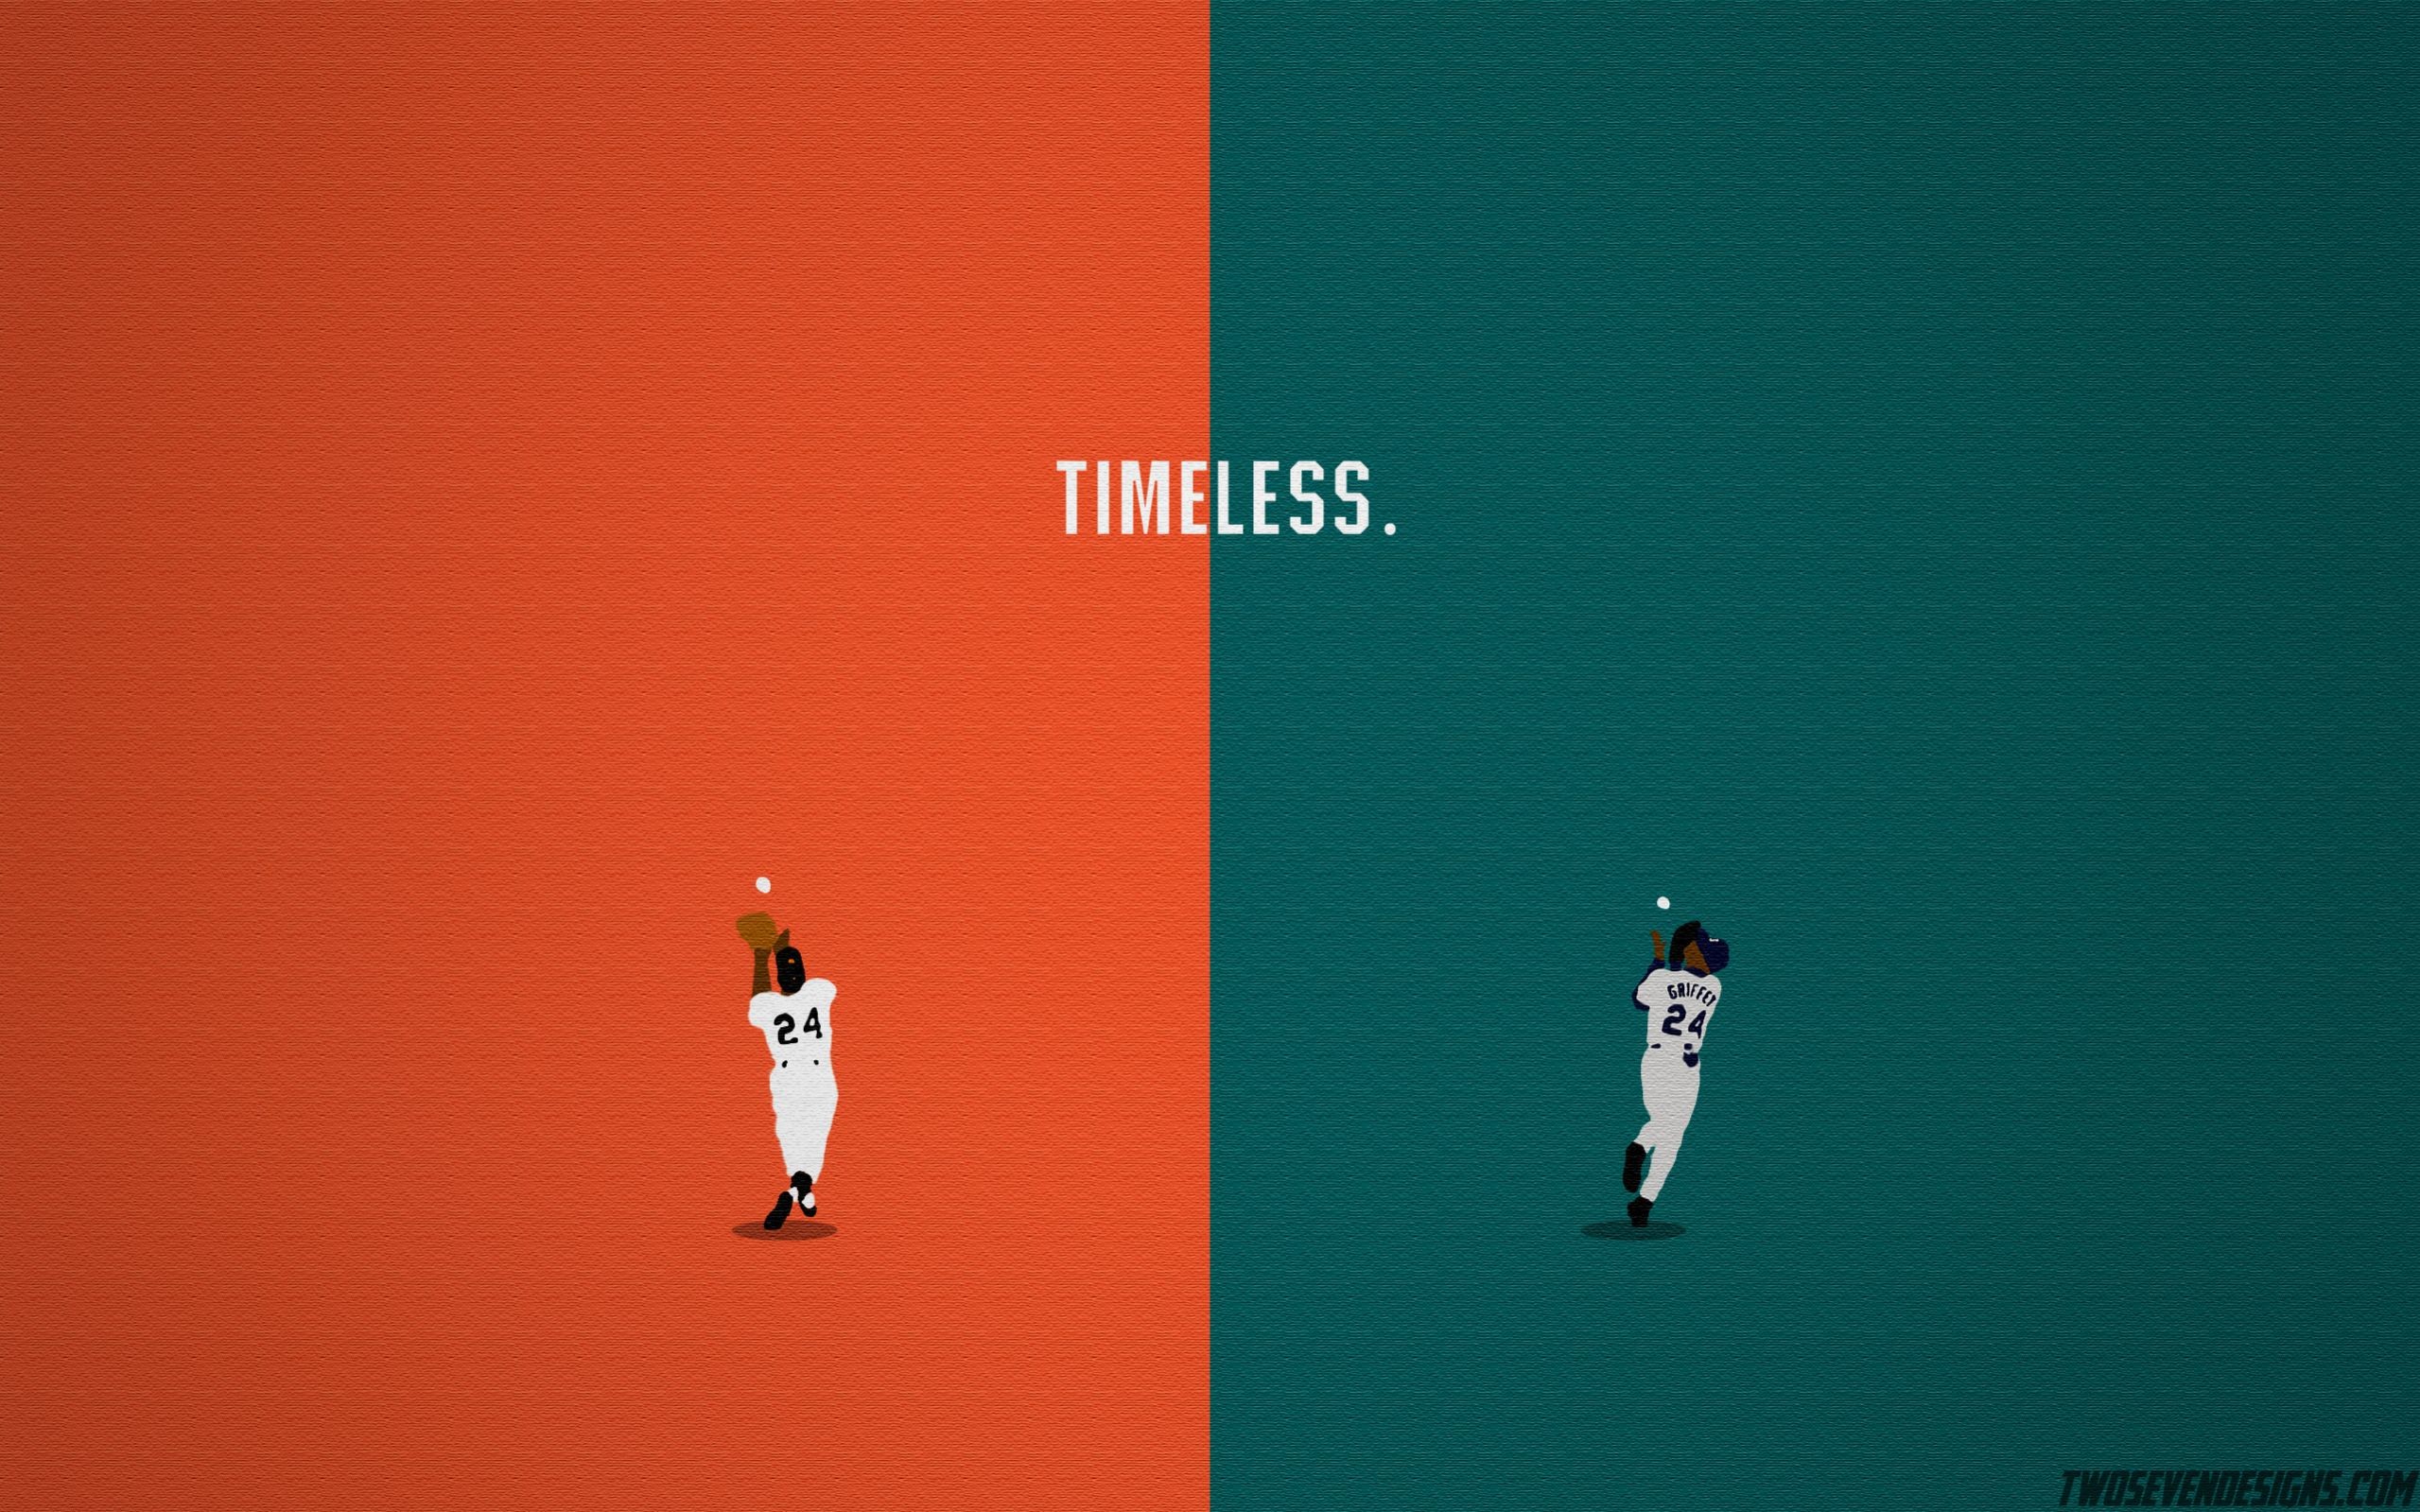 2559x1599 Started A New Series Of Baseball Wallpapers...I Couldn't Wait To